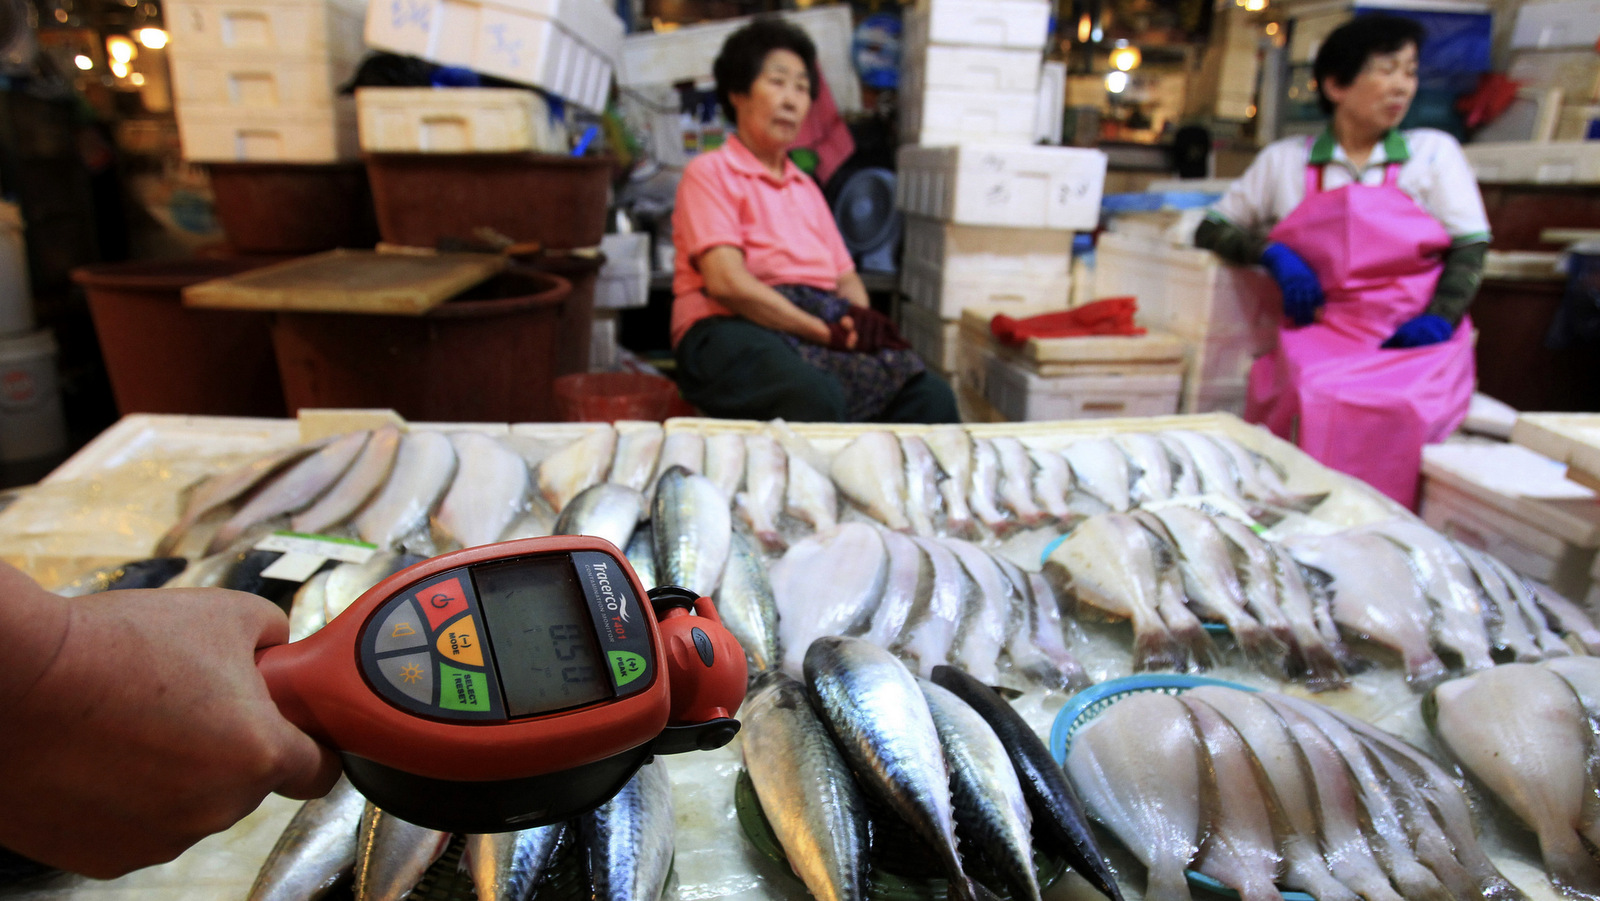 A worker uses a Geiger counter to check for possible radioactive contamination at Noryangjin Fisheries Wholesale Market in Seoul, South Korea. South Korea is appealing a World Trade Organization's decision against Seoul's import bans on Japanese fishery products imposed in the wake of Fukushima. (AP/Ahn Young-joon)